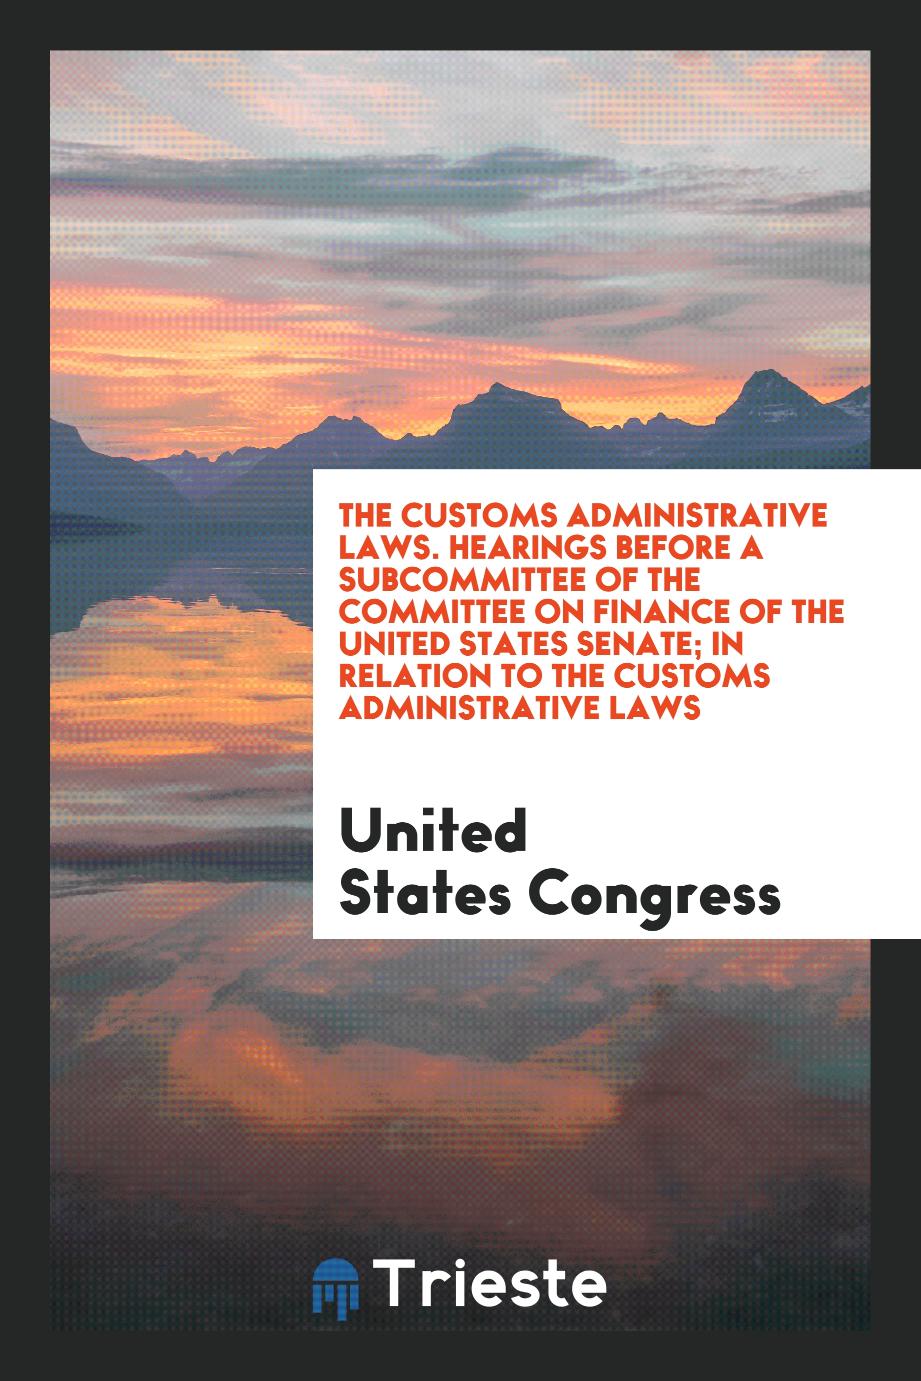 The Customs Administrative Laws. Hearings Before a Subcommittee of the Committee on Finance of the United States Senate; In Relation to the Customs Administrative Laws